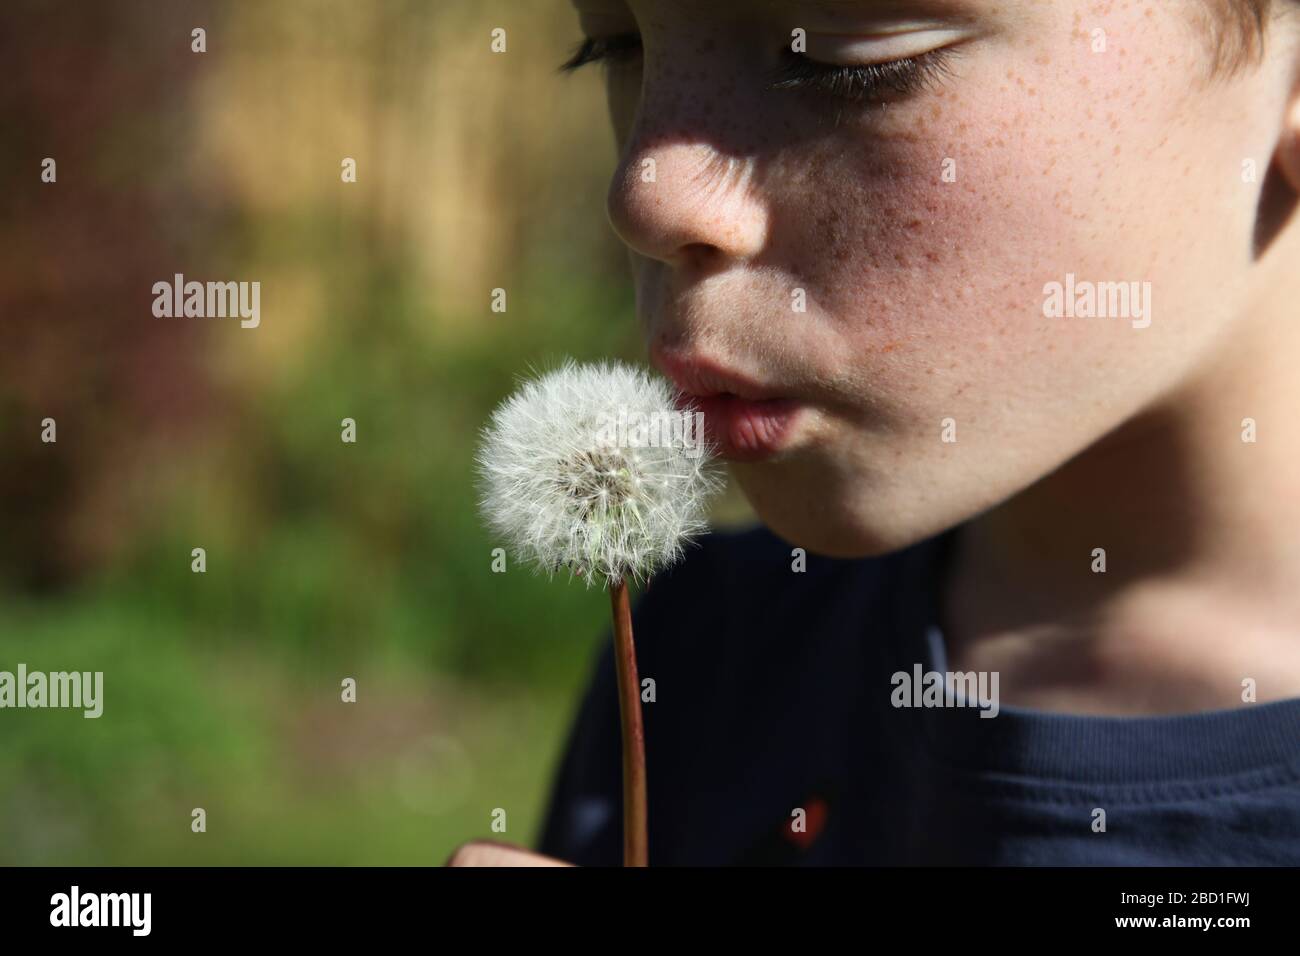 A young boy, aged 9, blows on a dandelion 'Taraxacum' parachute ball head in a UK garden at daytime, Spring 2020 Stock Photo